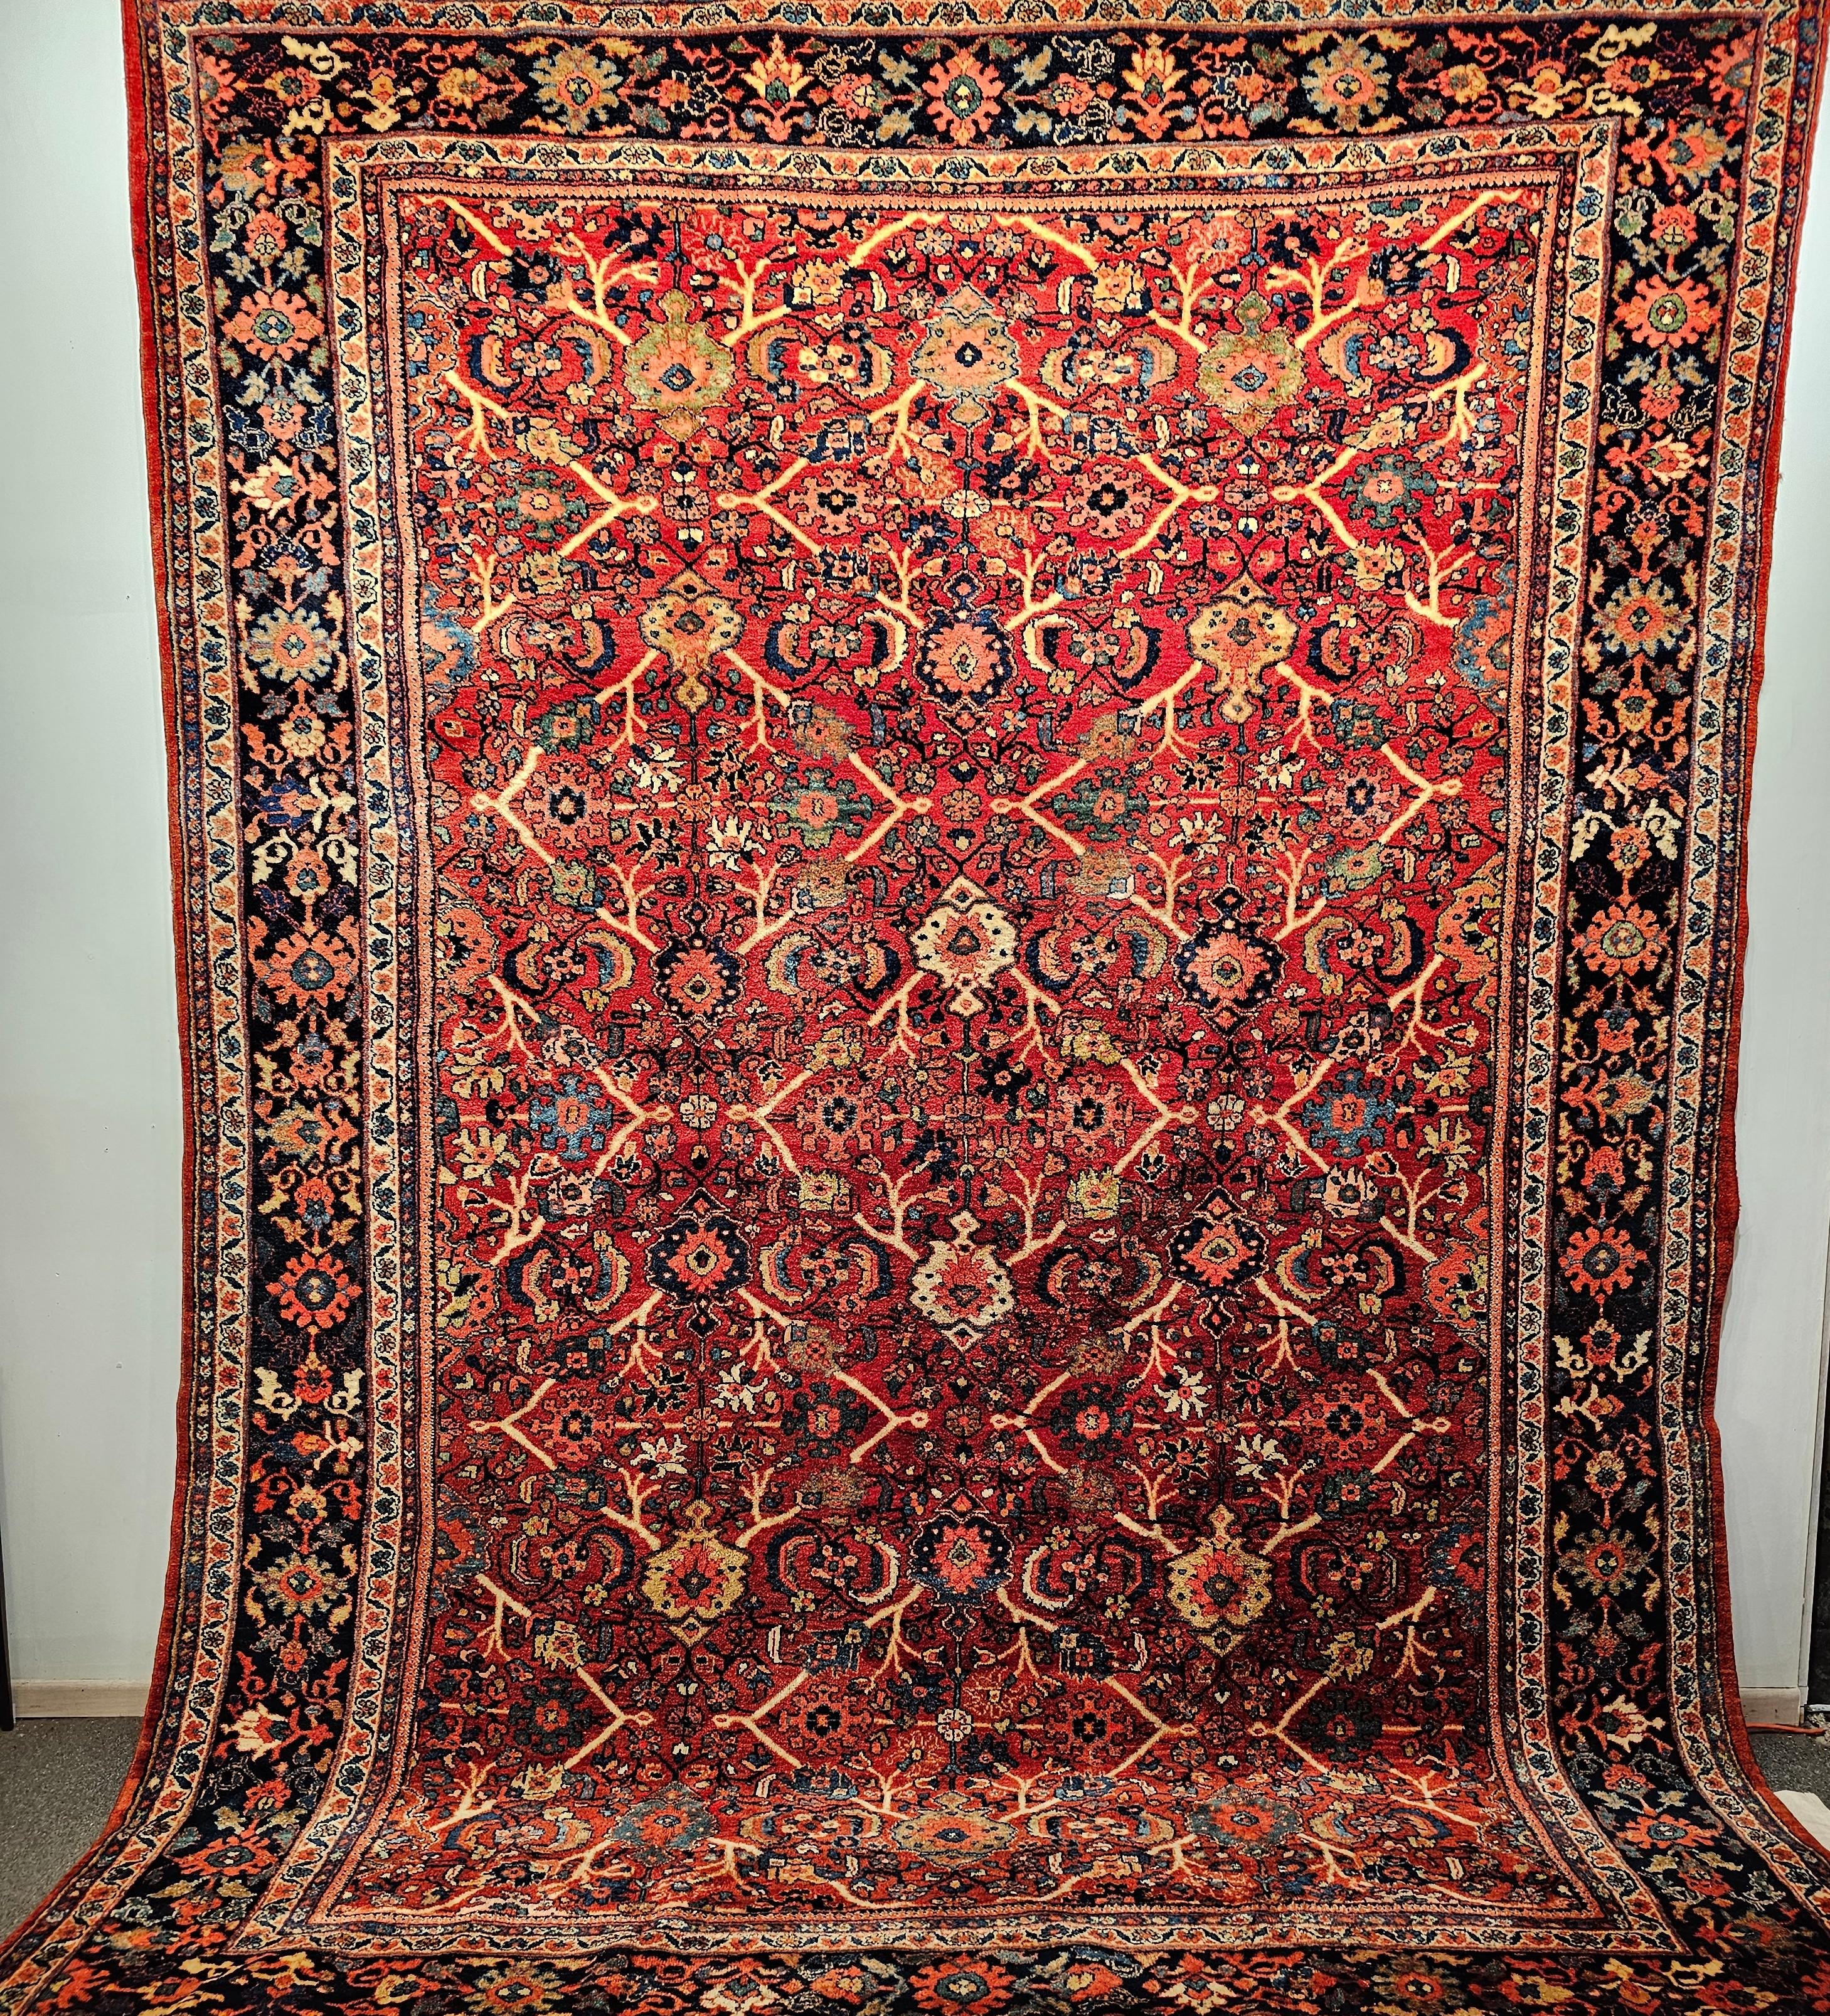 One of the most magnificent Persian Mahal Sultanabad rugs in our collection from the early 1900s.  The rug is in a large-scale all-over design pattern with geometric forms connected via scrolling lines.  The rug has a rust-red field color with